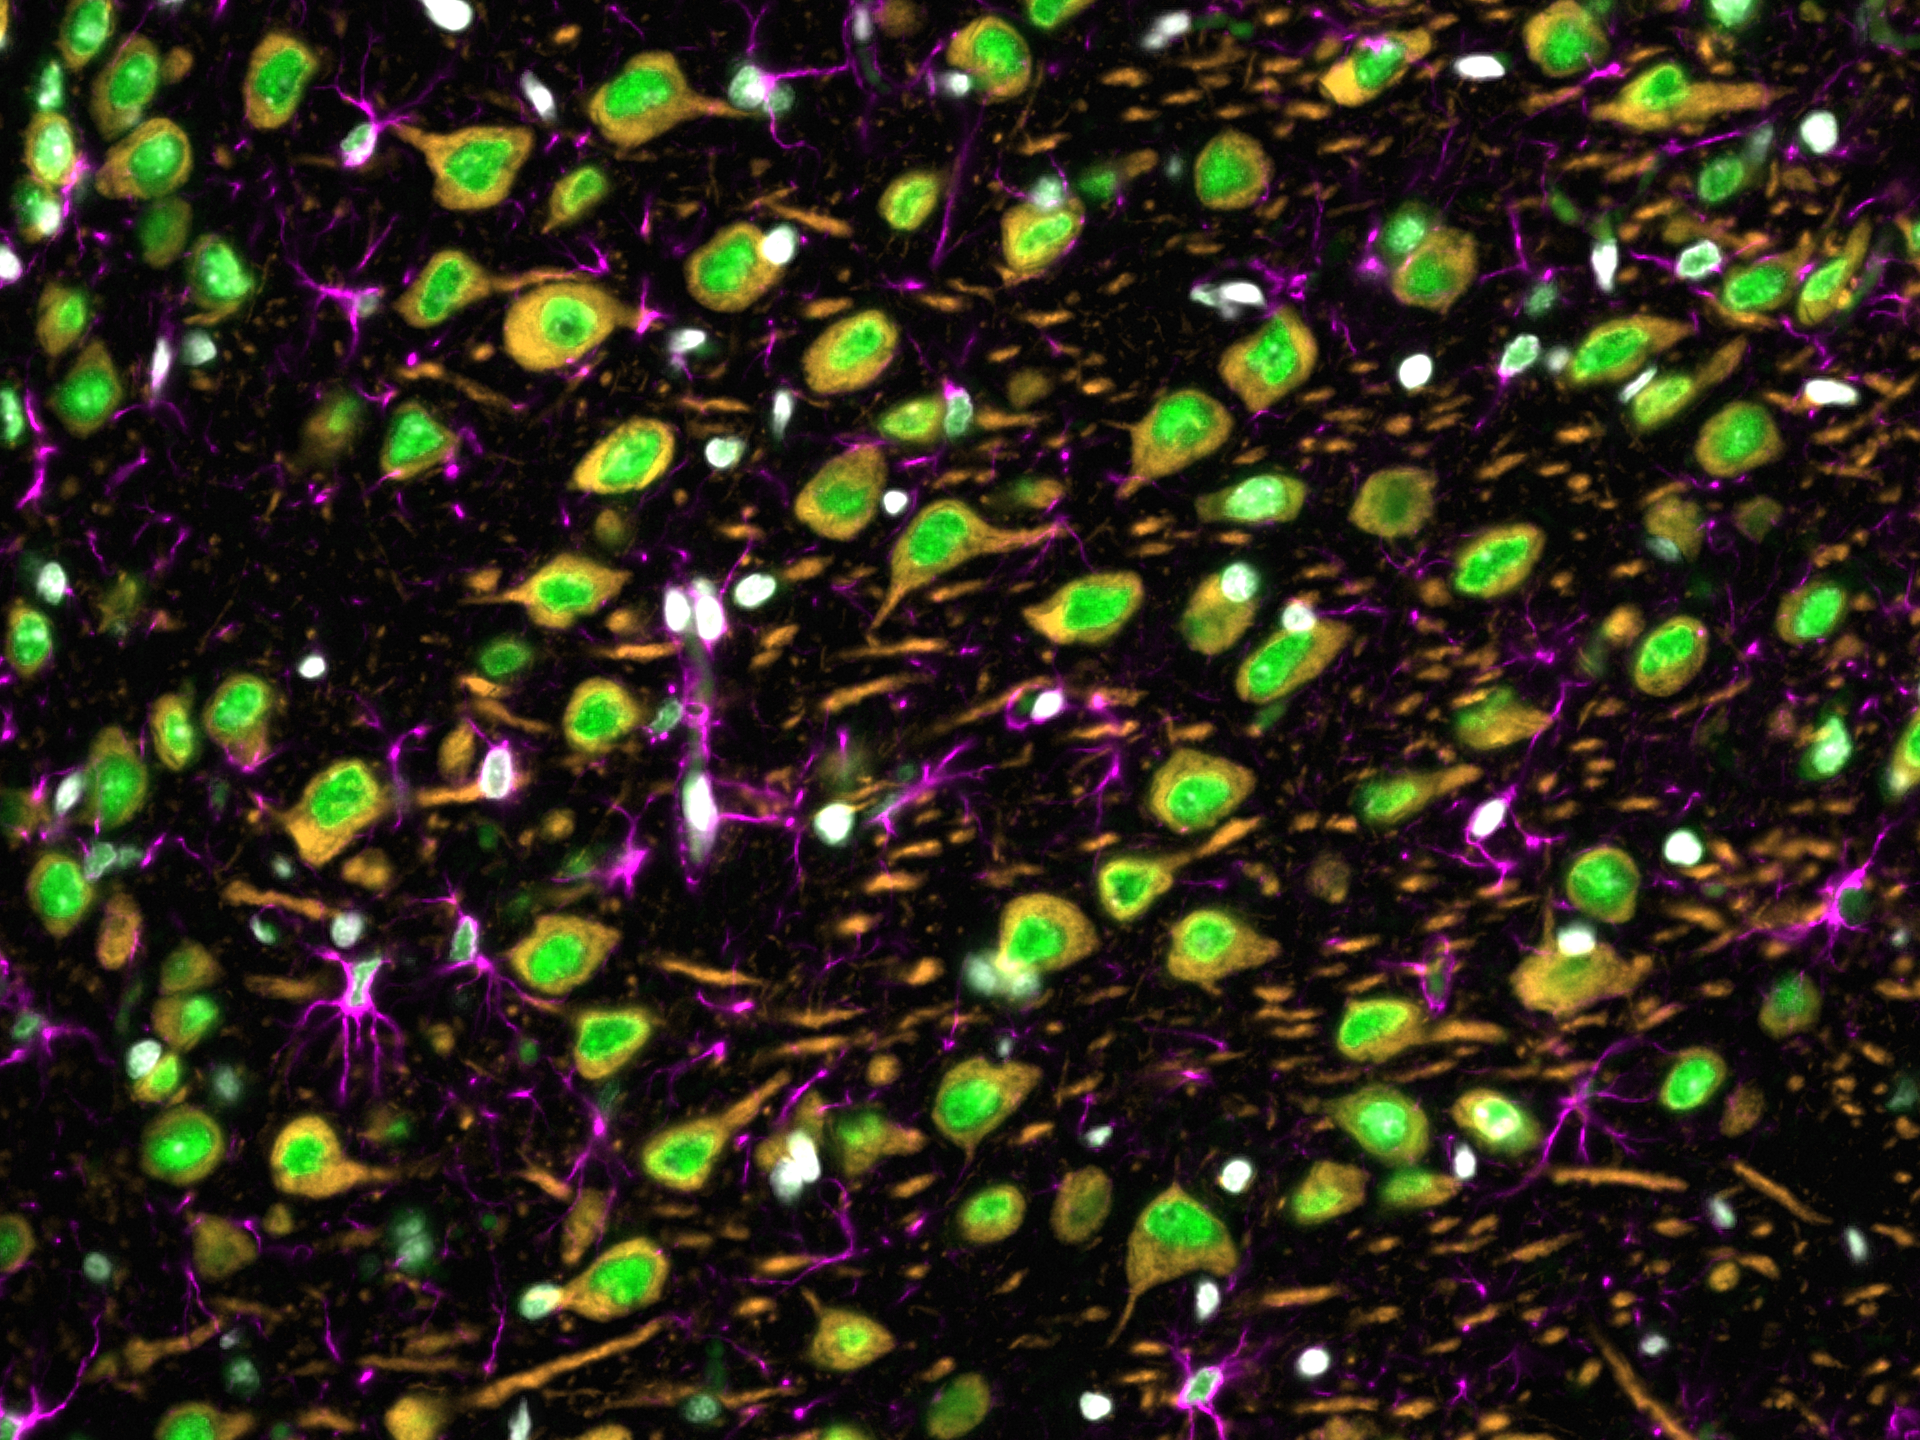 Immunofluorescence of rat brain tissue: FFPE rat brain tissue sections were stained with anti-MAP2 antibody (17490-1-AP) labeled with FlexAble CoraLite Plus 550 Kit (KFA002, orange), anti-GFAP antibody (16825-1-AP) labeled with FlexAble CoraLite Plus 650 Kit (KFA003, magenta) and CoraLite®488-conjugated TDP-43 antibody (CL488-10782, green).